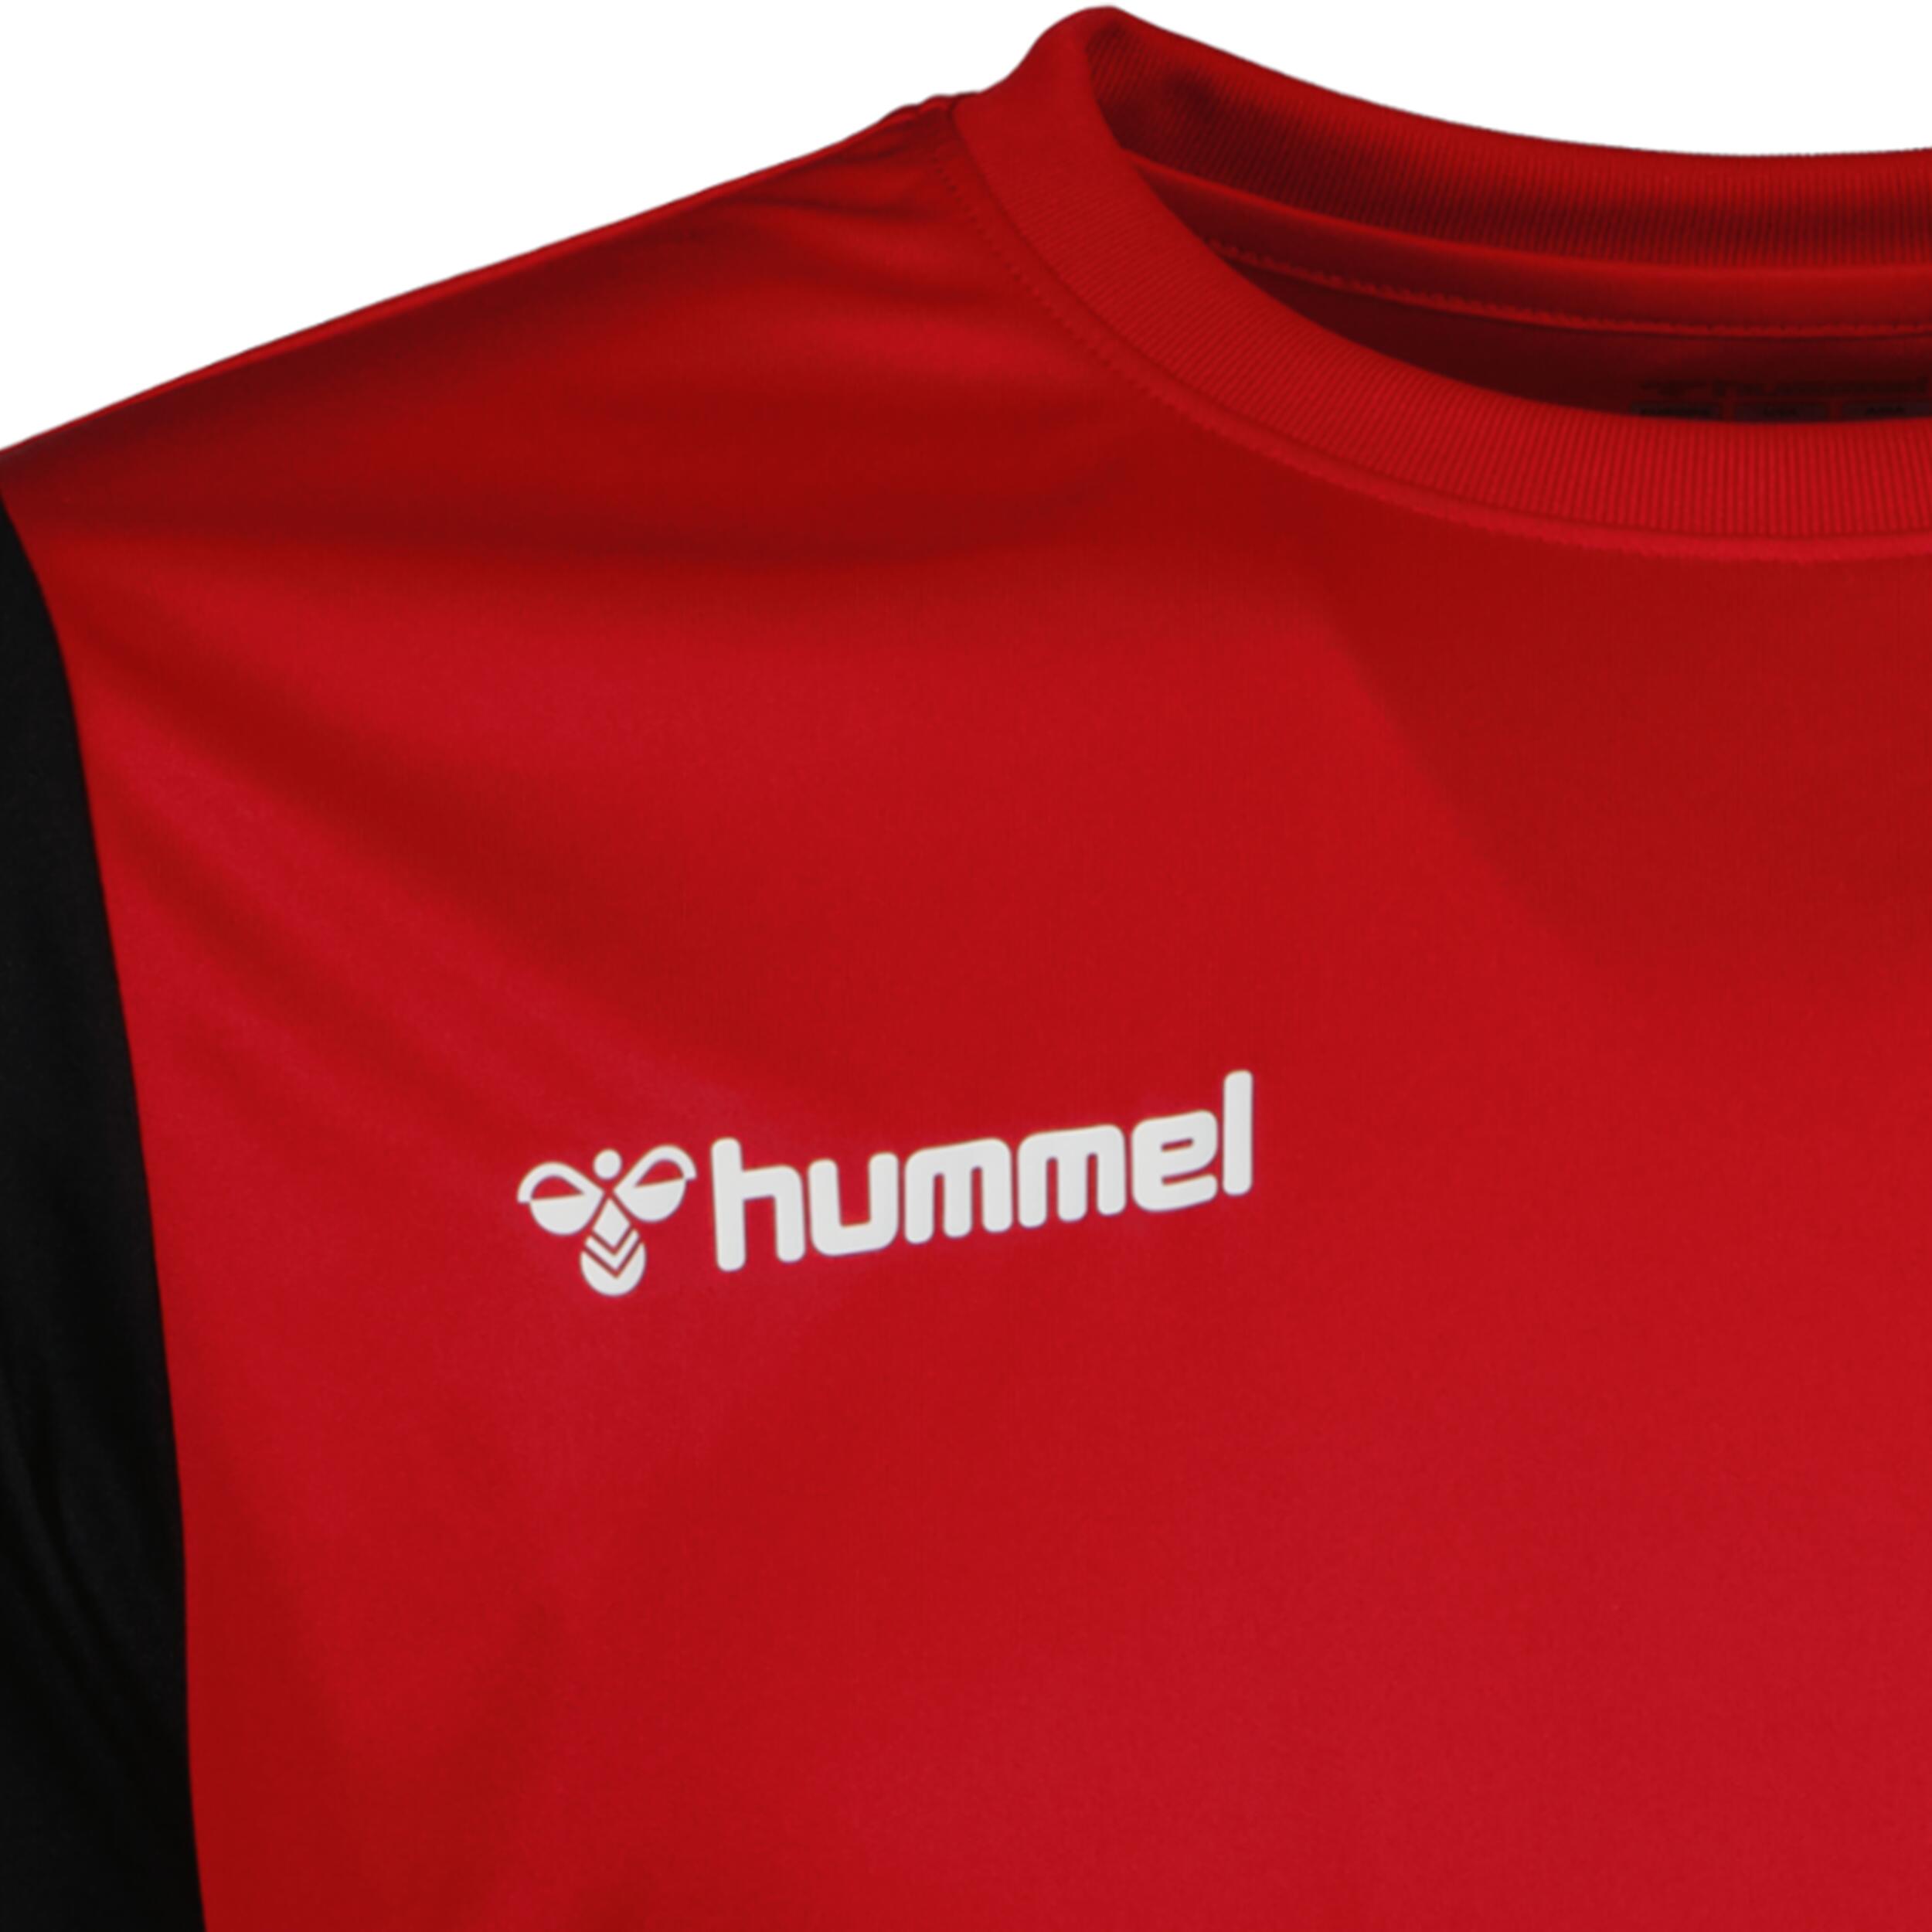 Match jersey for kids, great for football, in red/black 3/3